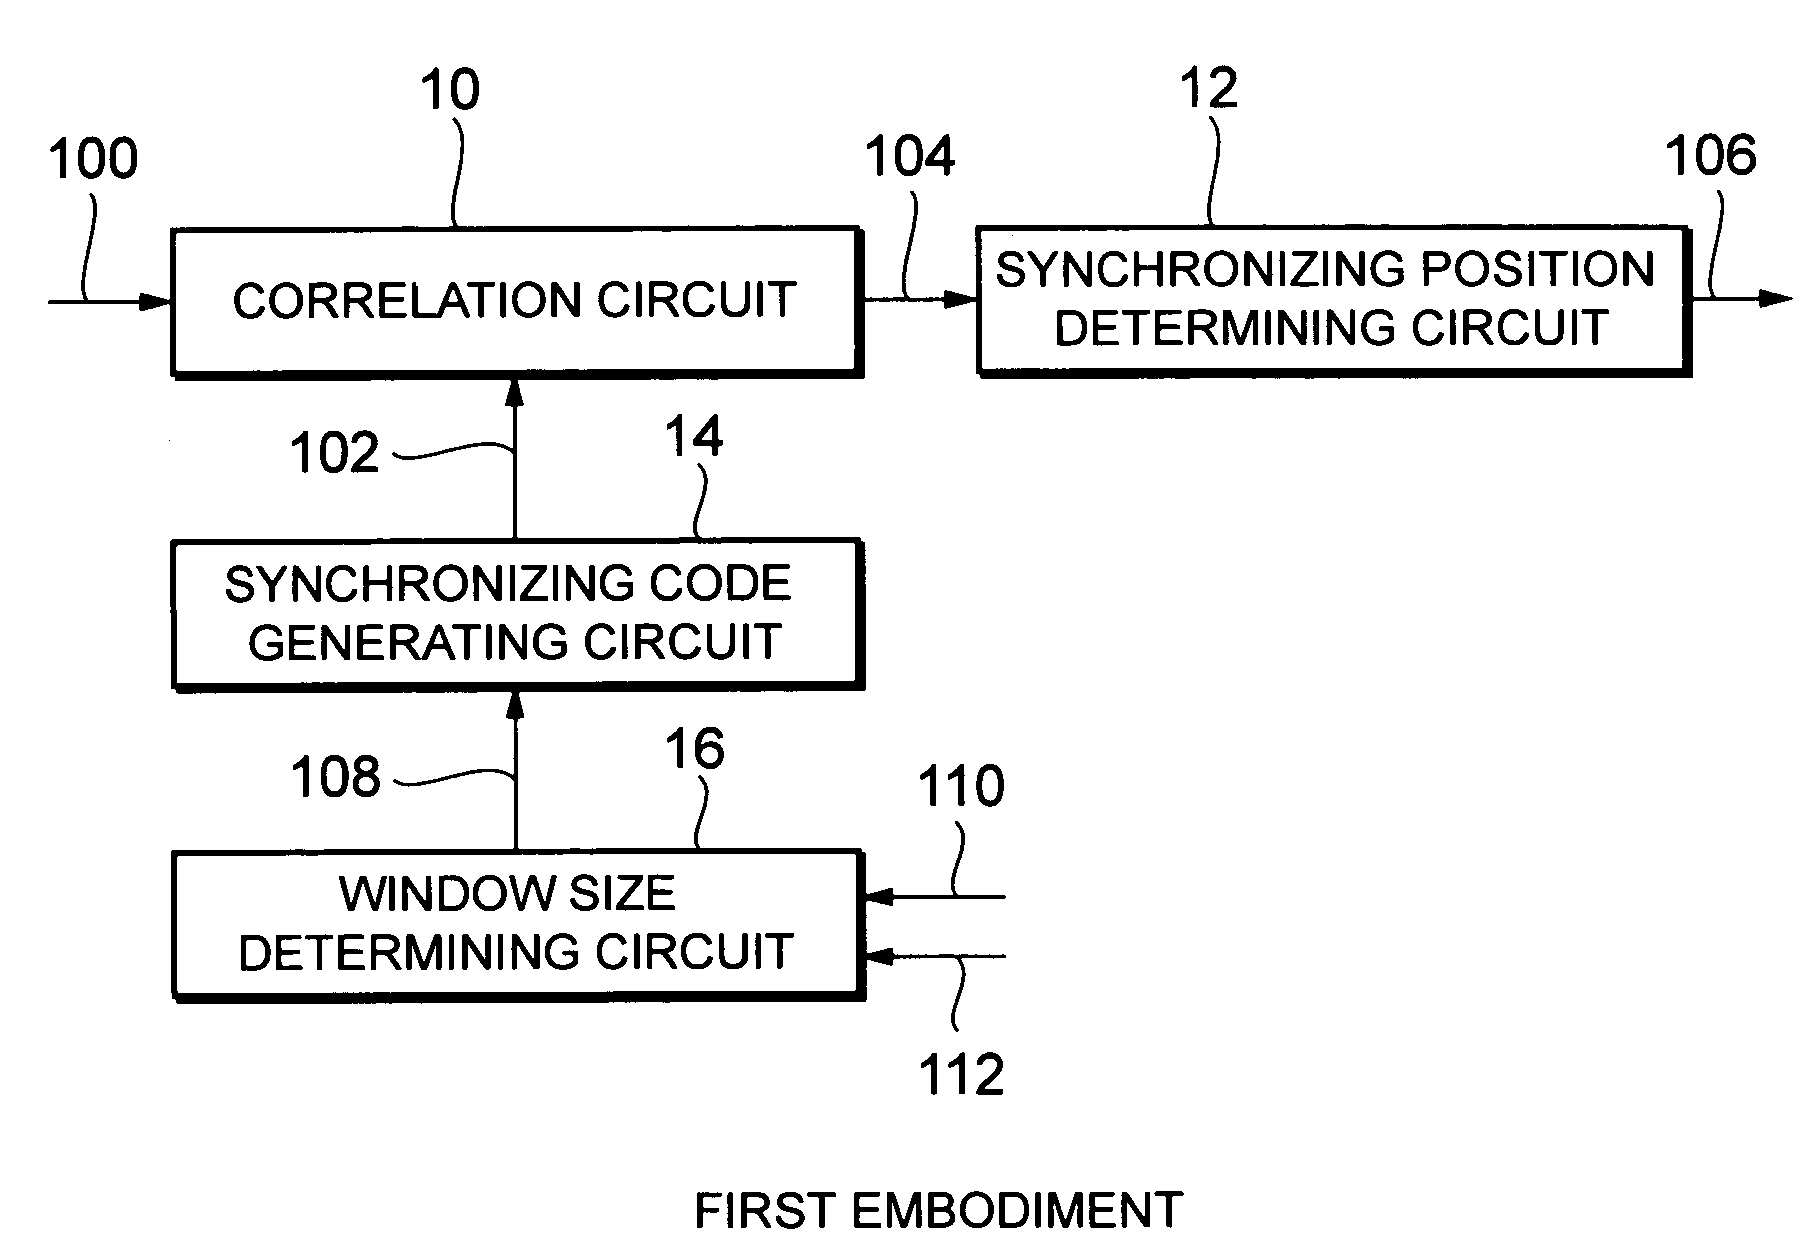 Synchronizing position detecting circuit